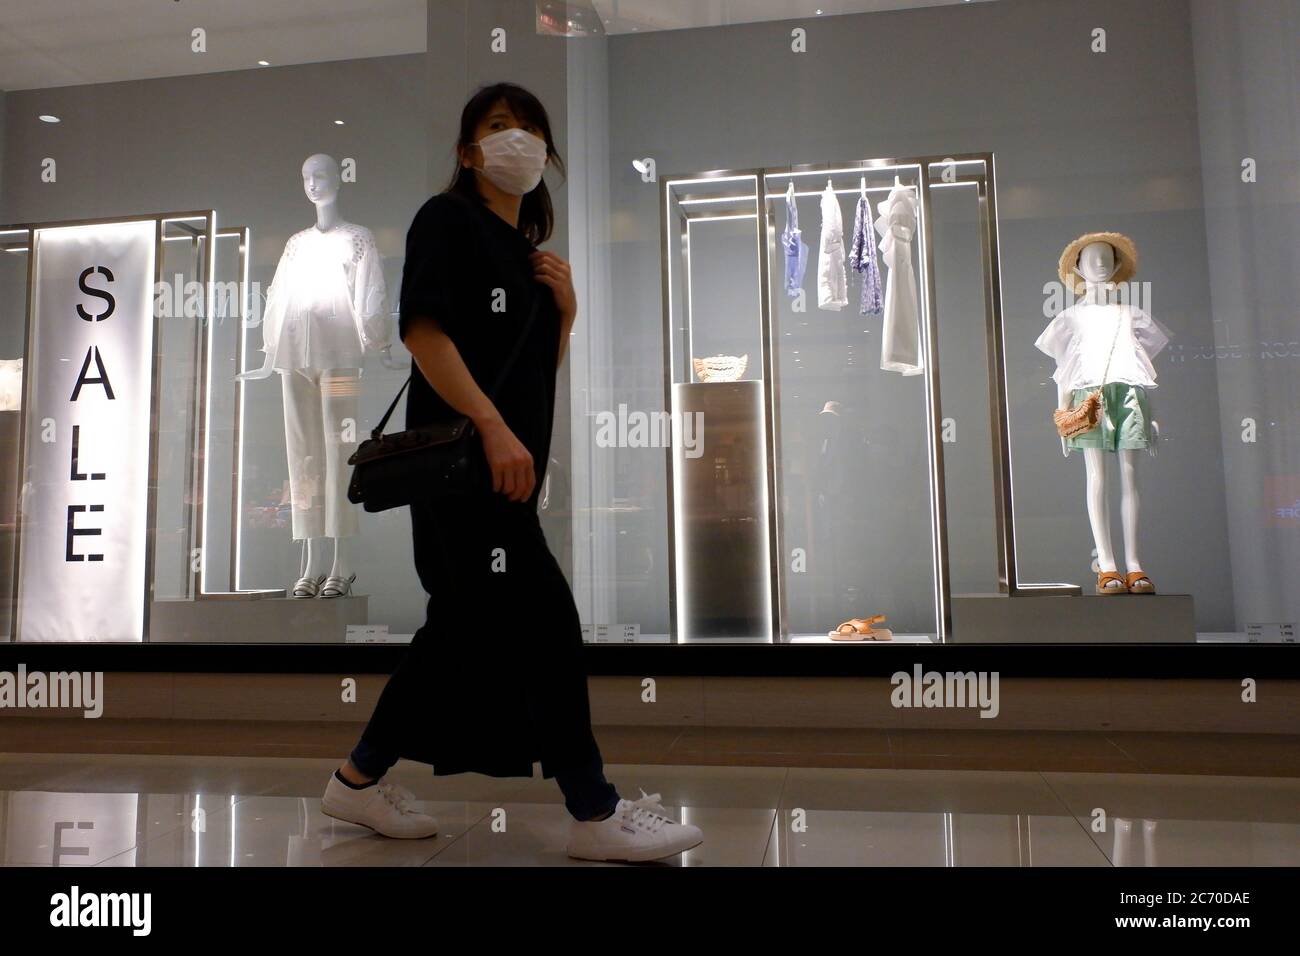 A woman wearing a protective face mask walks past a ZARA store at a shopping district amid the coronavirus (COVID-19) outbreak.Tokyo on Monday reported 119 new coronavirus infections, falling below 200 for the first time in five days, Tokyo Gov. Yuriko Koike said. Stock Photo